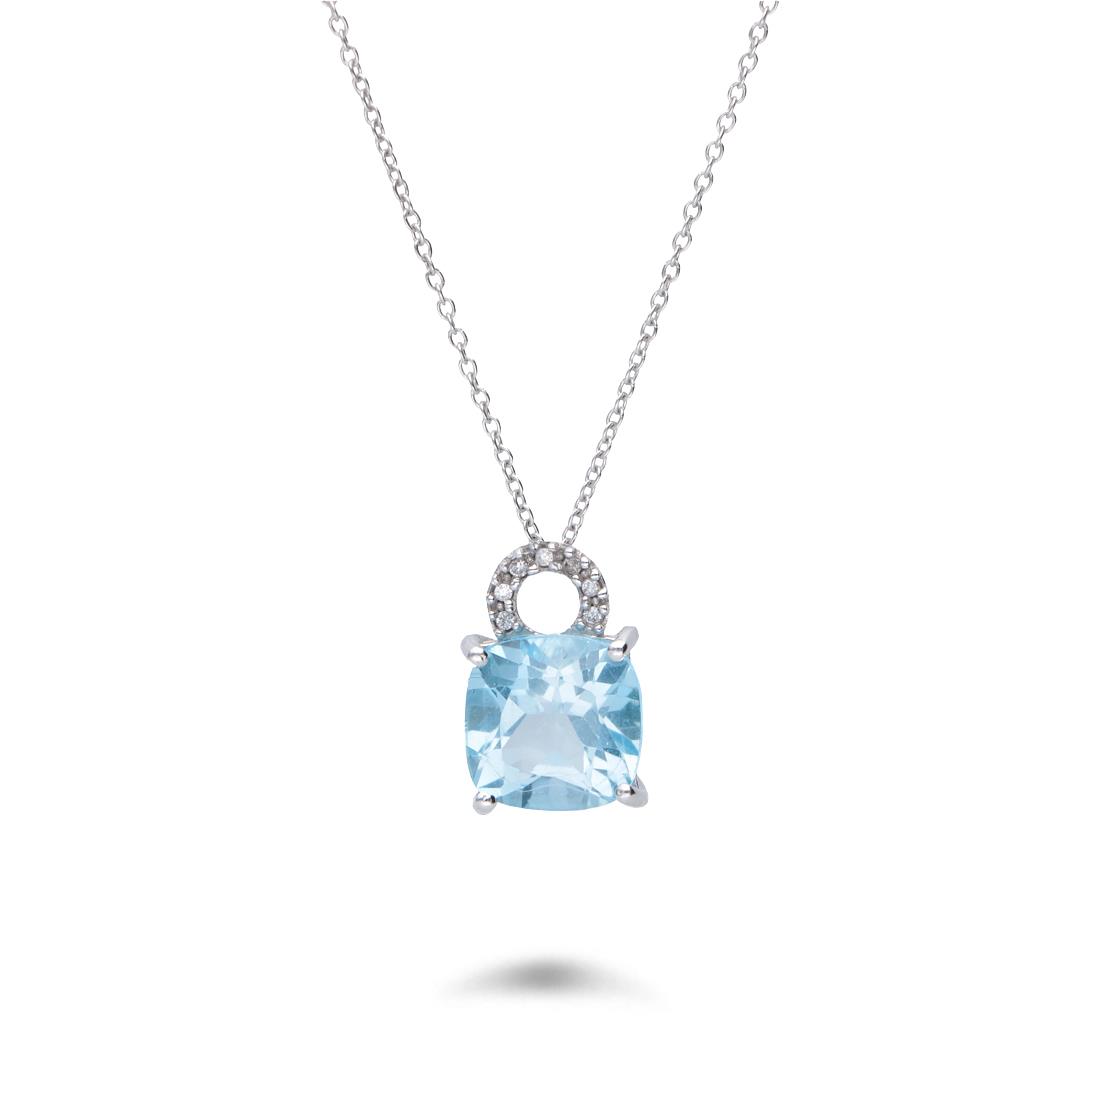 White gold necklace with blue topaz and diamonds - ALFIERI & ST. JOHN